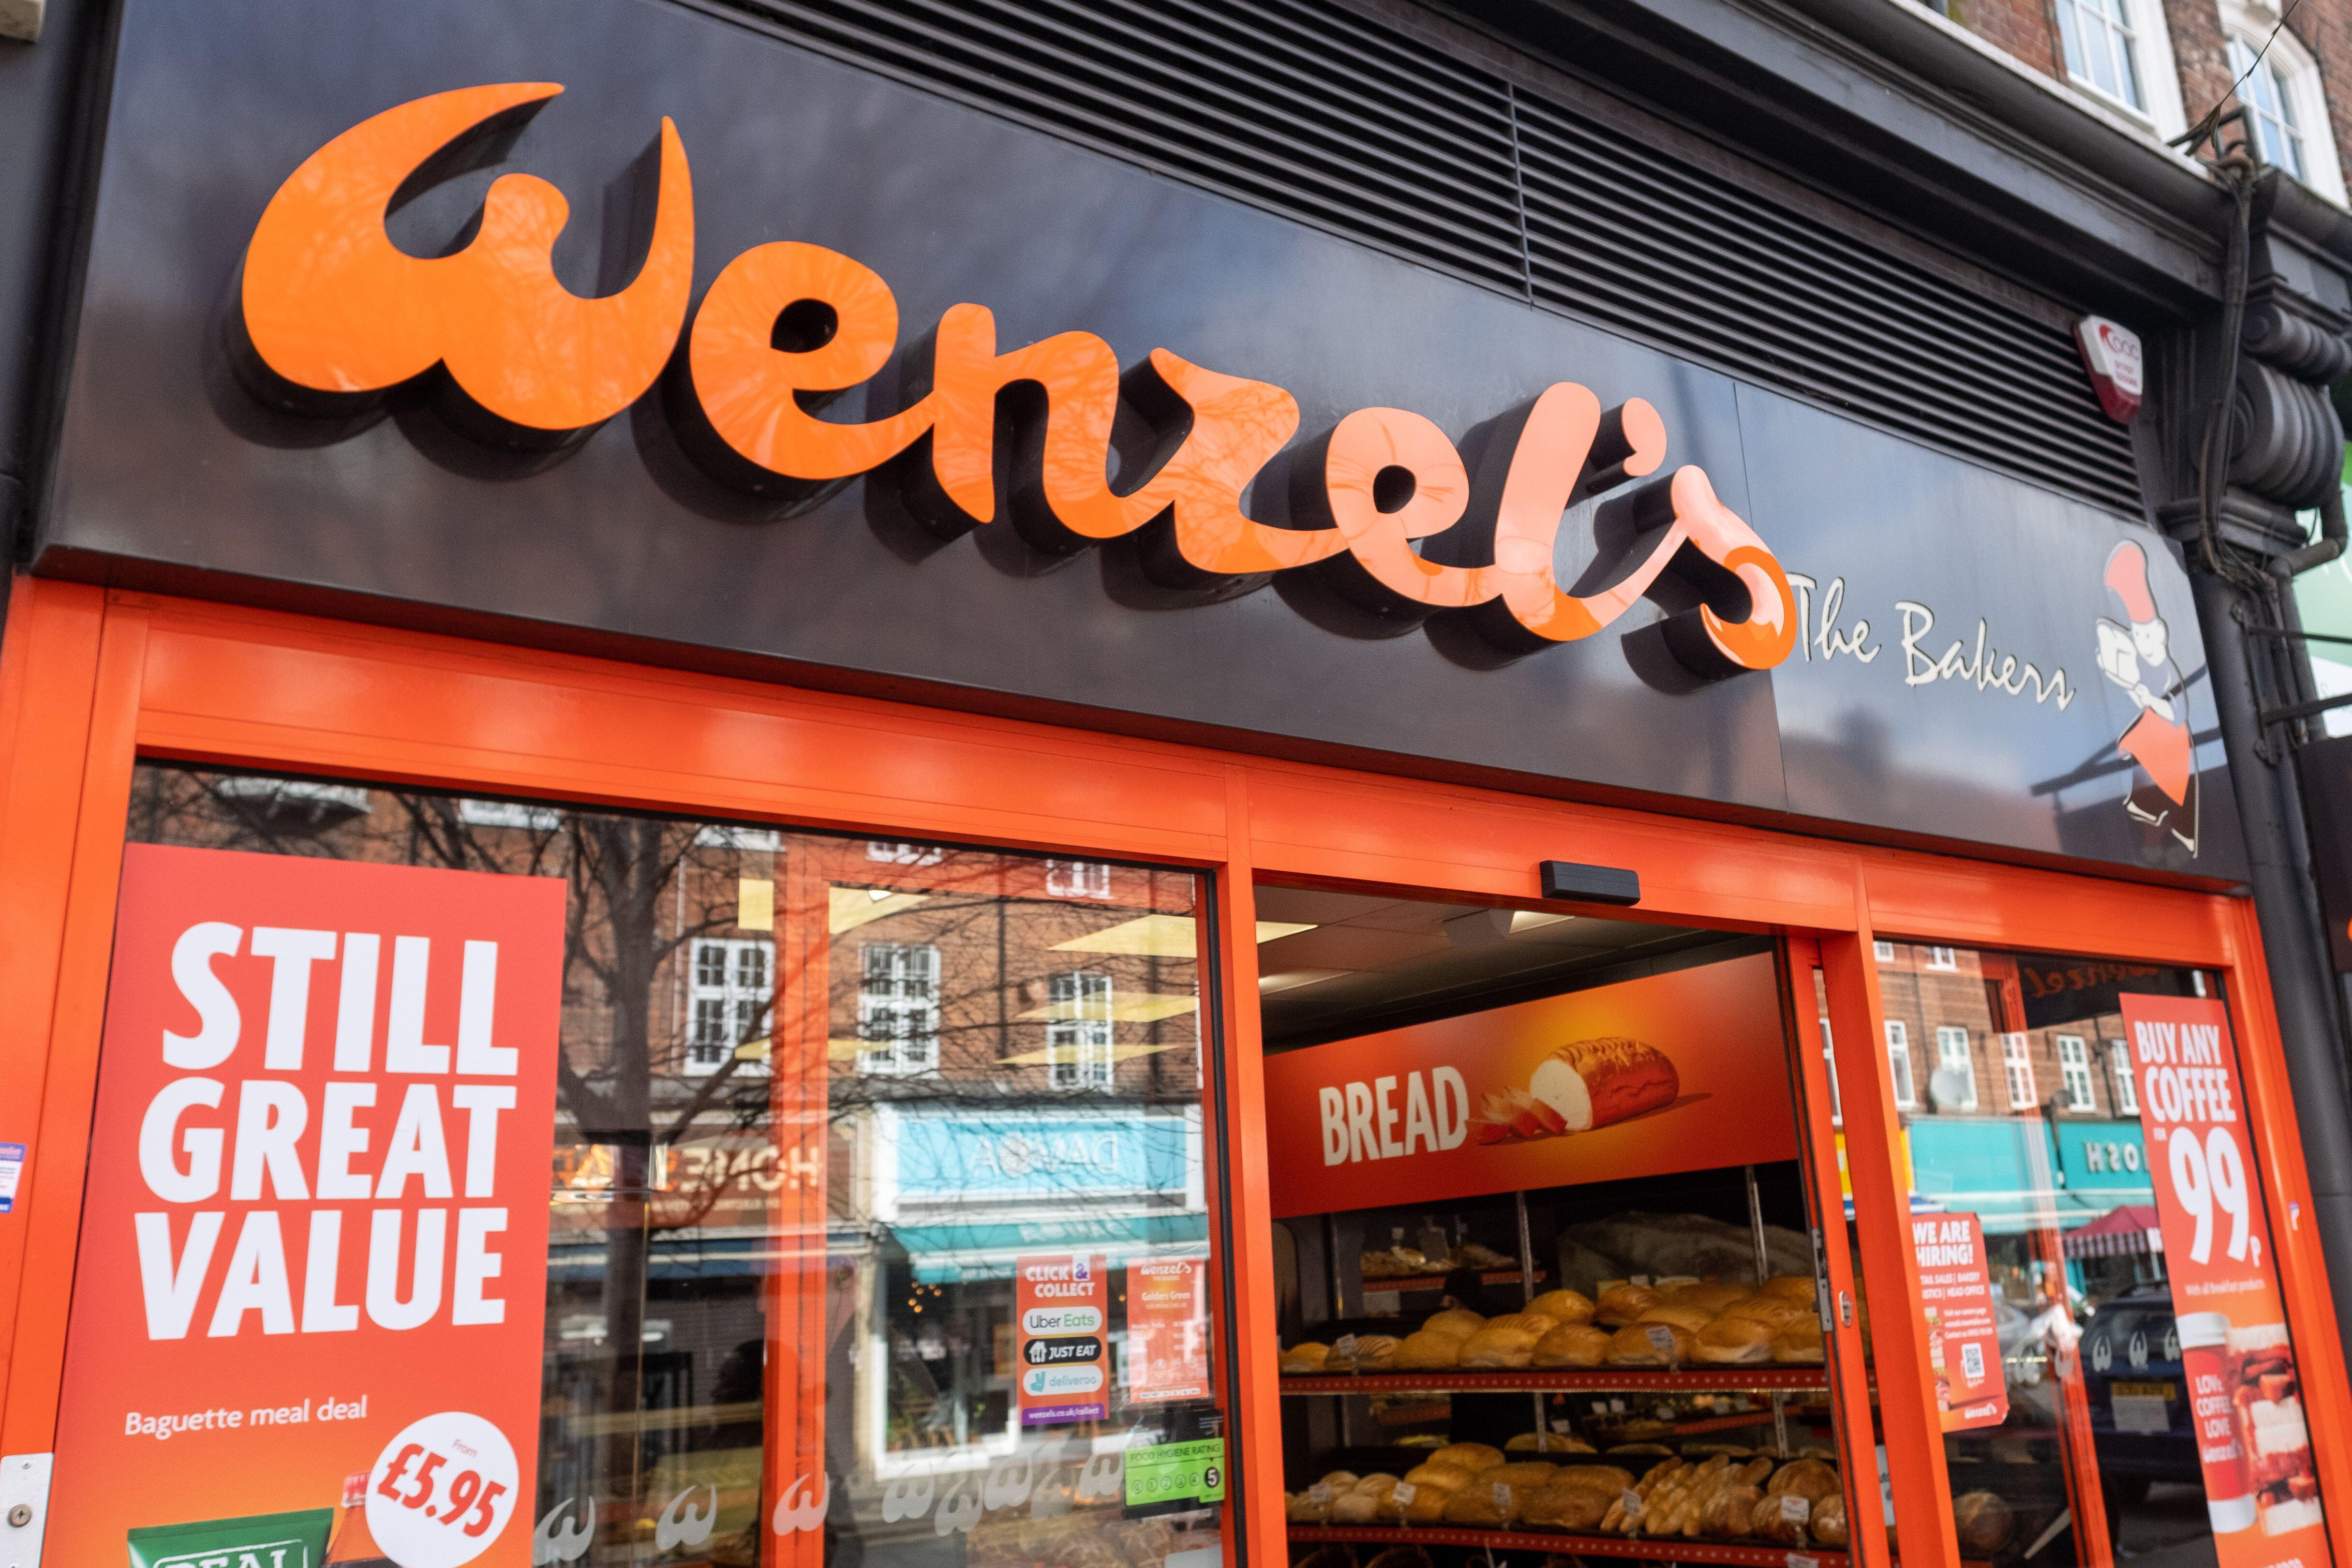 Wenzel's has been dubbed 'better than Greggs'